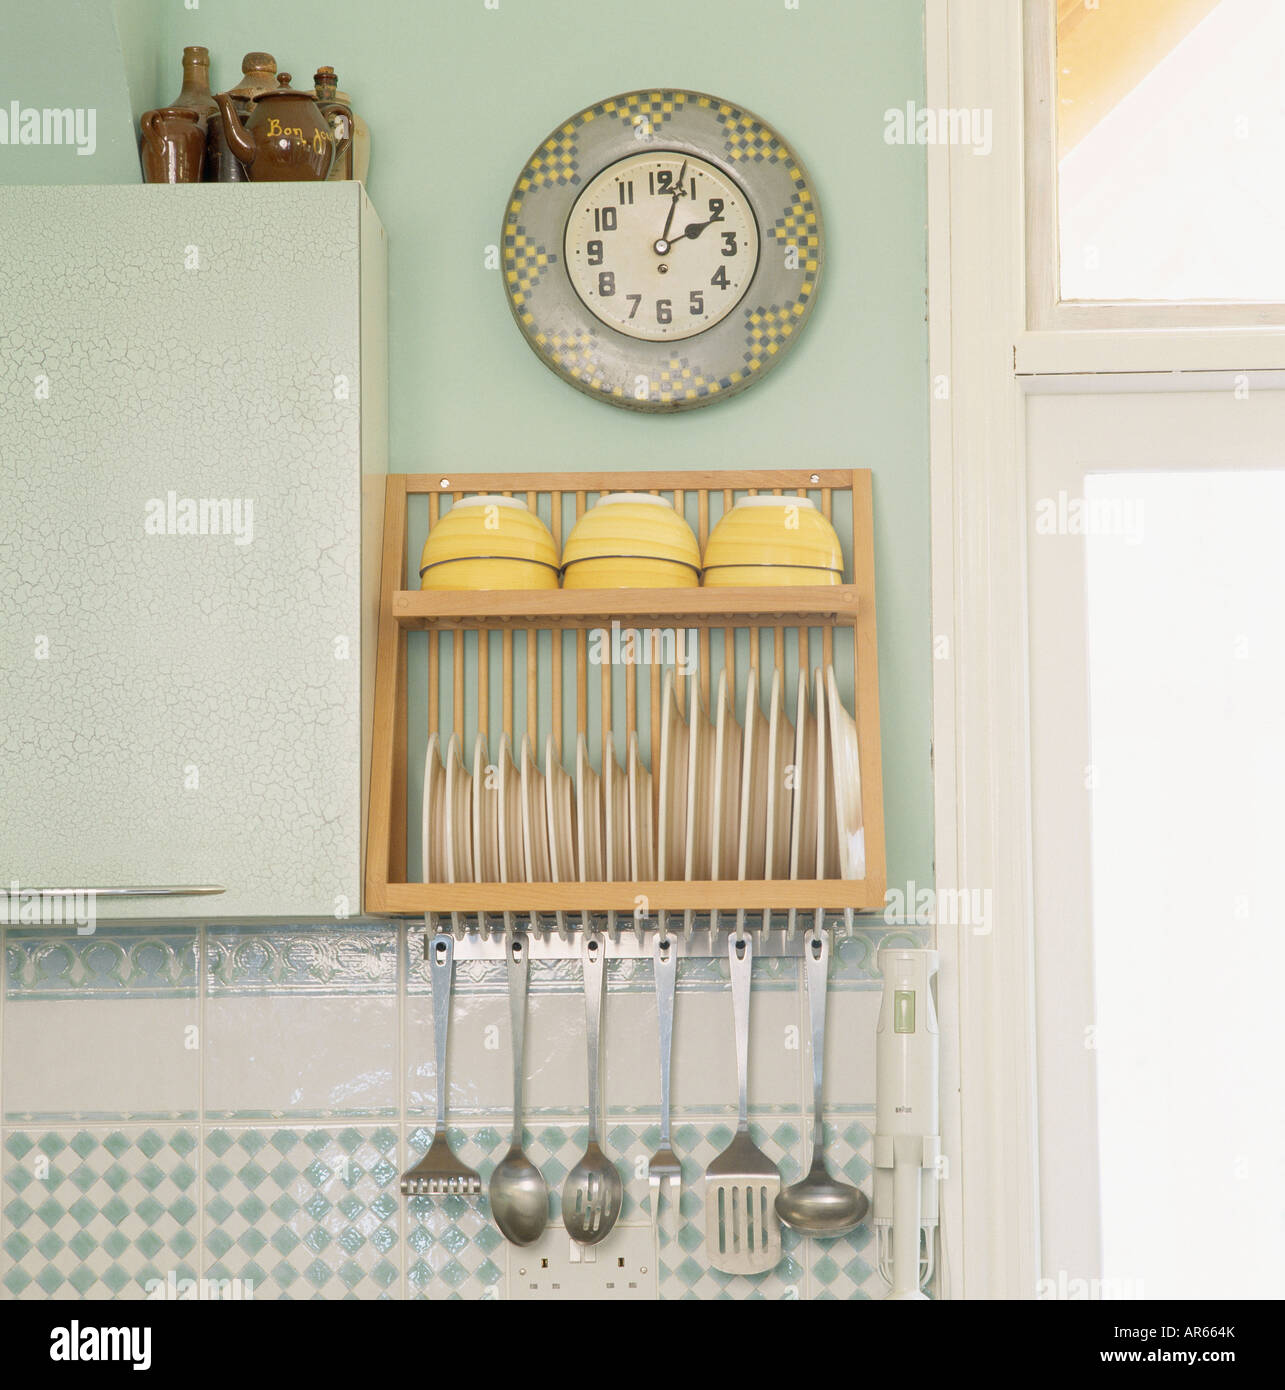 Clock above plate rack with stainless steel utensils stored below Stock Photo